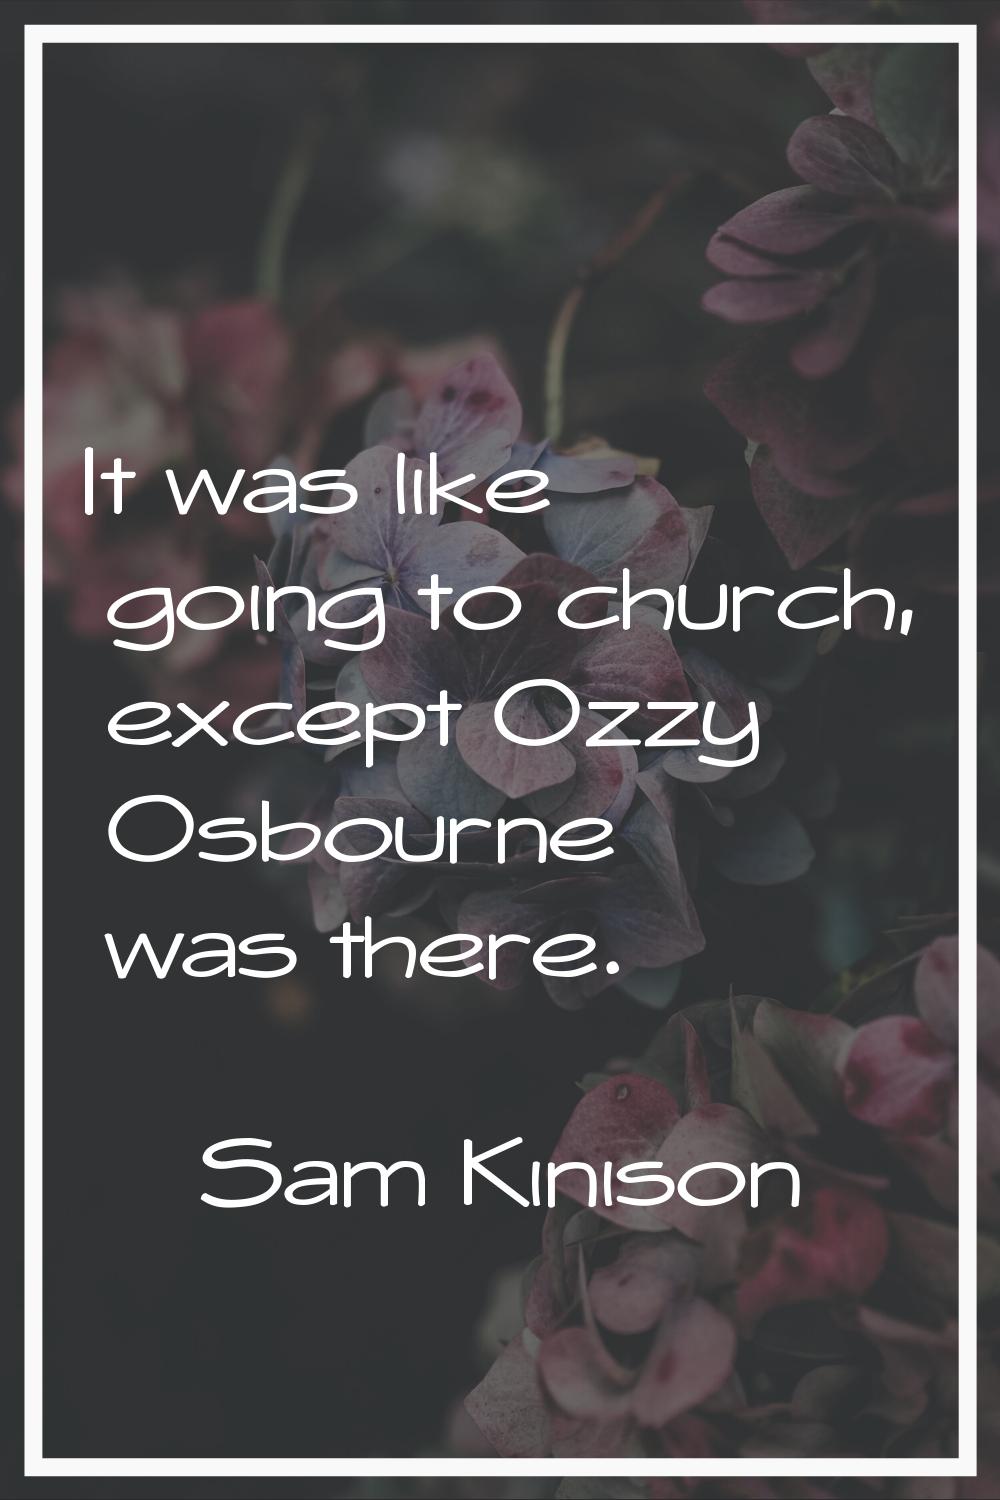 It was like going to church, except Ozzy Osbourne was there.